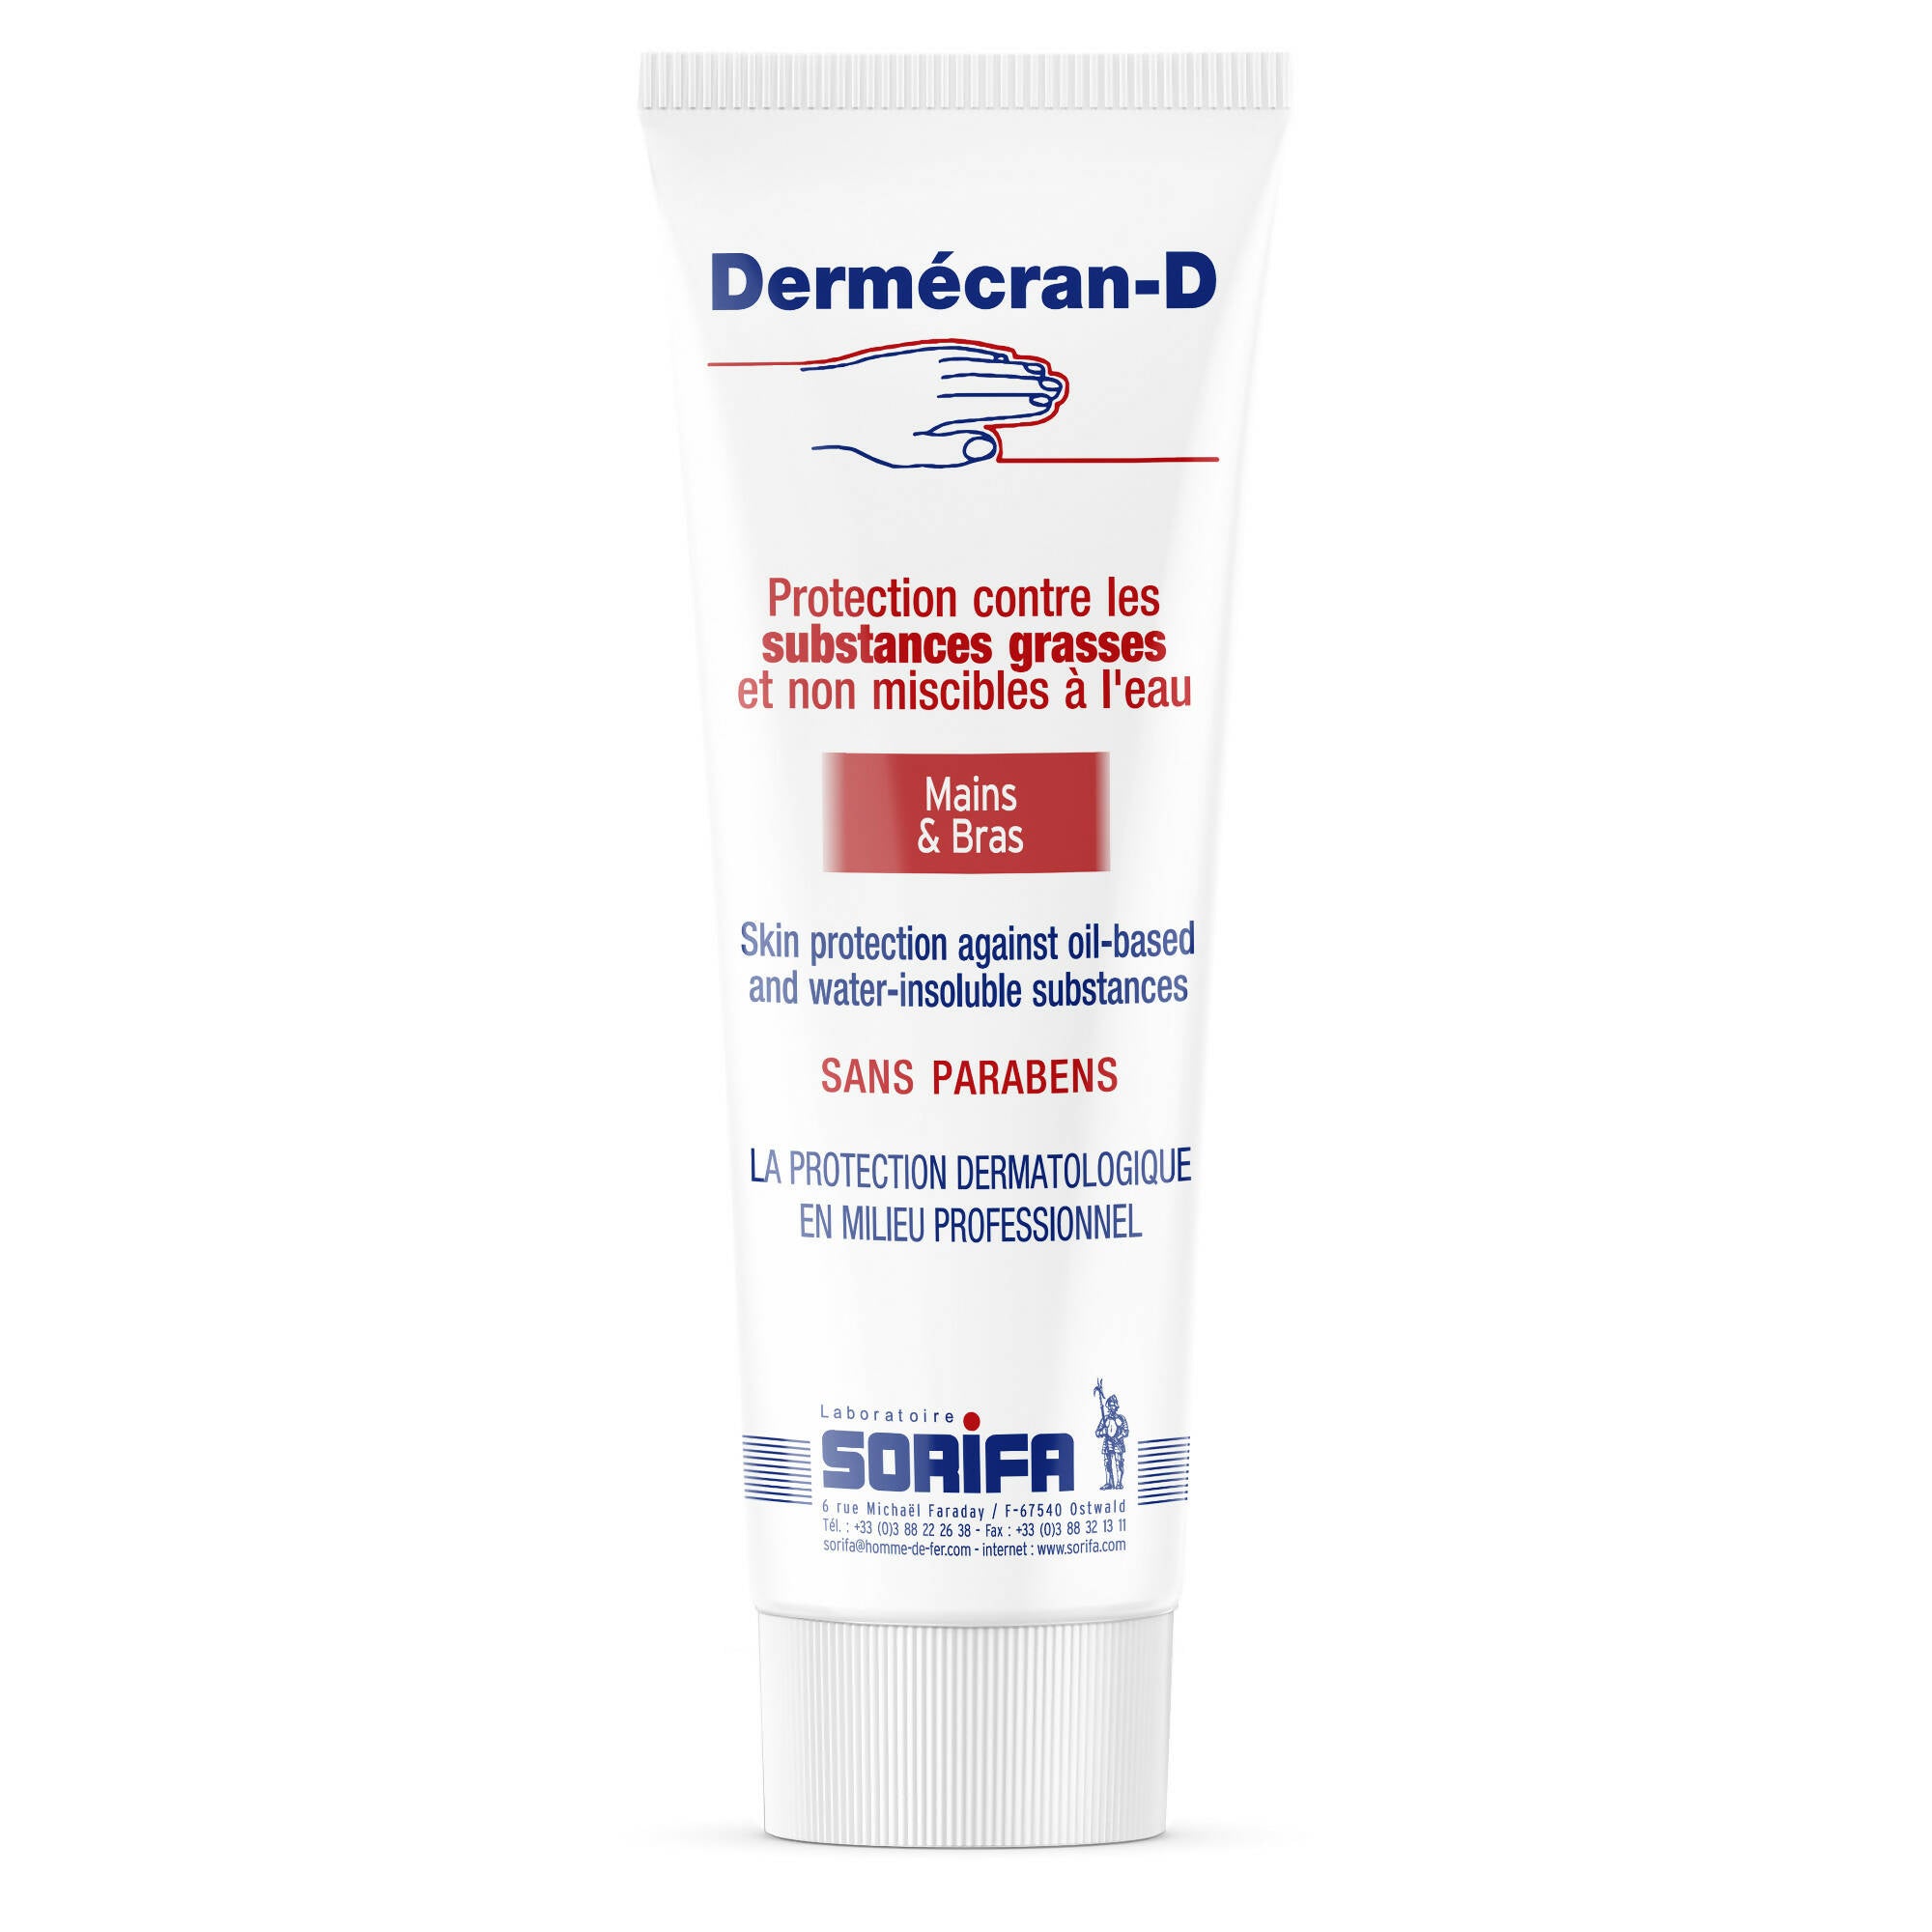 SORIFA - Set of 3 - Dermscreen - ANTI-GREASE protective paste - SLOOD - POWDER - PIGMENTS - Hands and arms - High tolerance - 125 ml tube. - 0